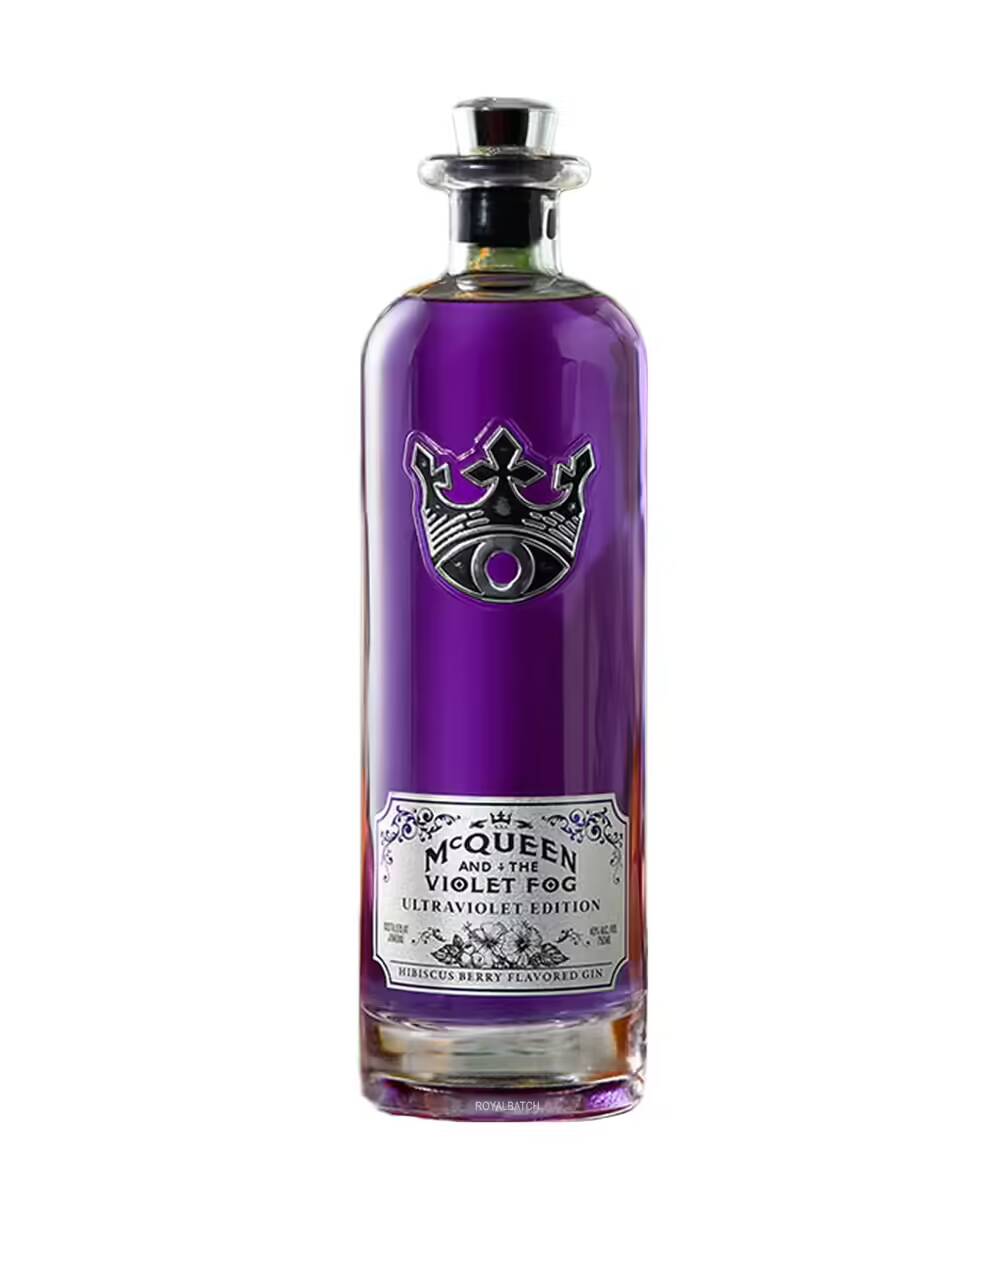 Mc Queen And The Violet Fog Ultraviolet Edition Gin